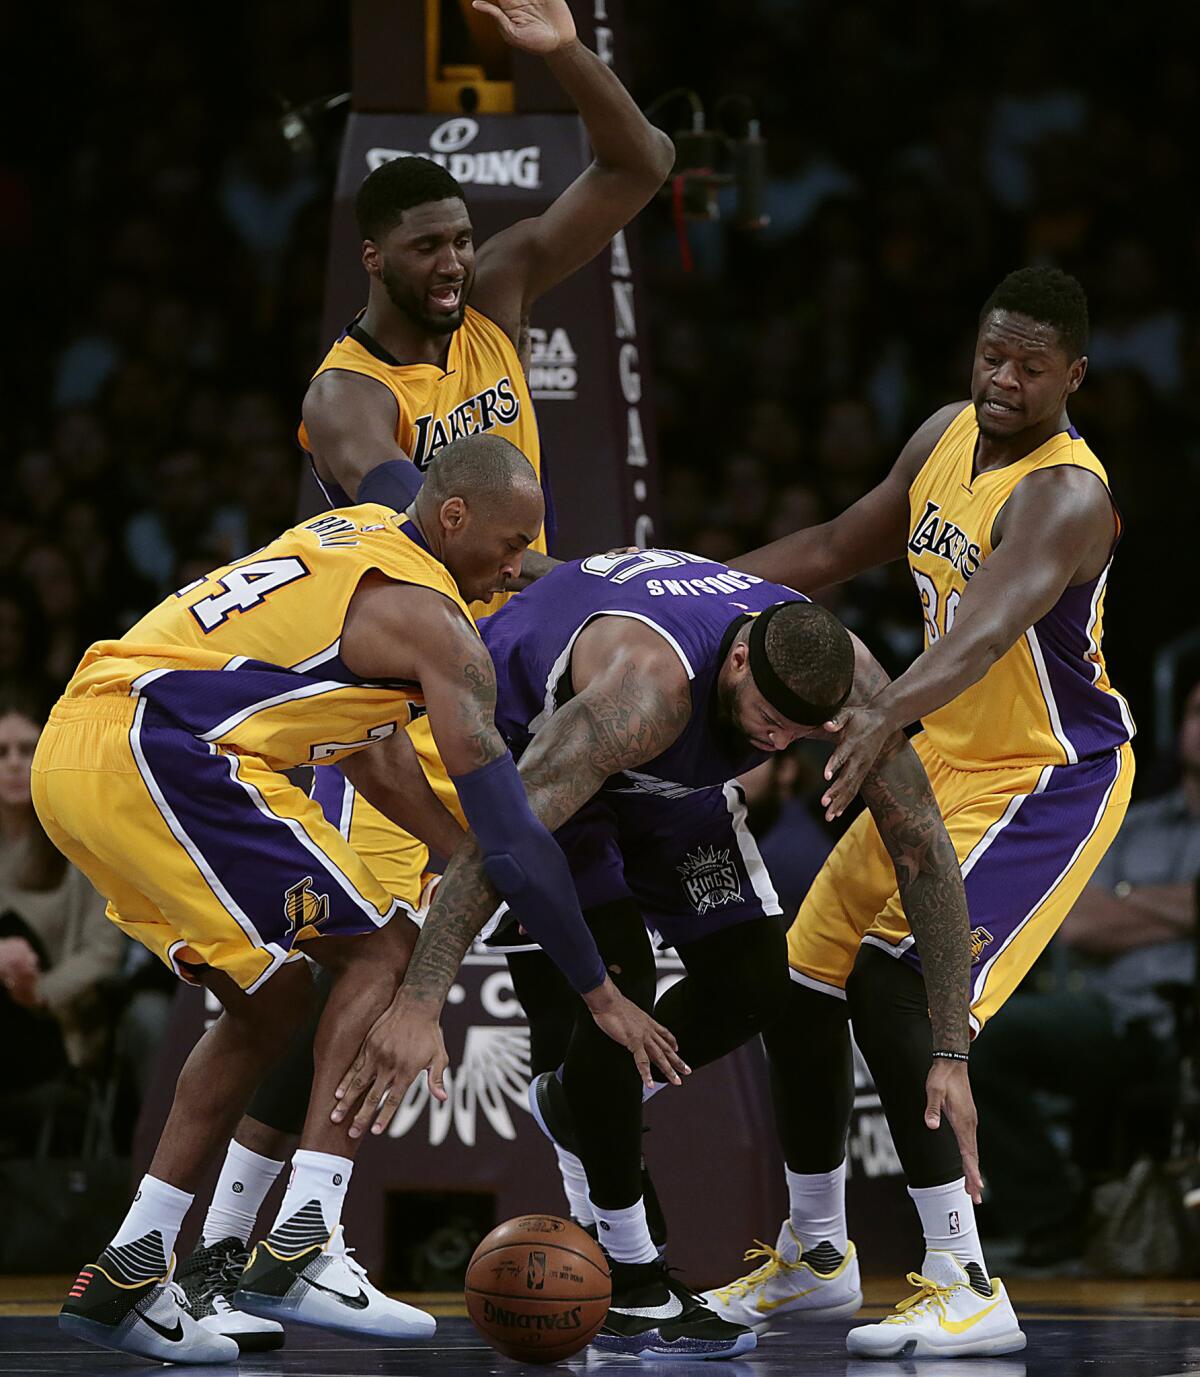 Sacramento center DeMarcus Cousins is swarmed by Lakers Kobe Bryant, left, Roy Hibbert and Julius Randle during the first half at Staples Center.